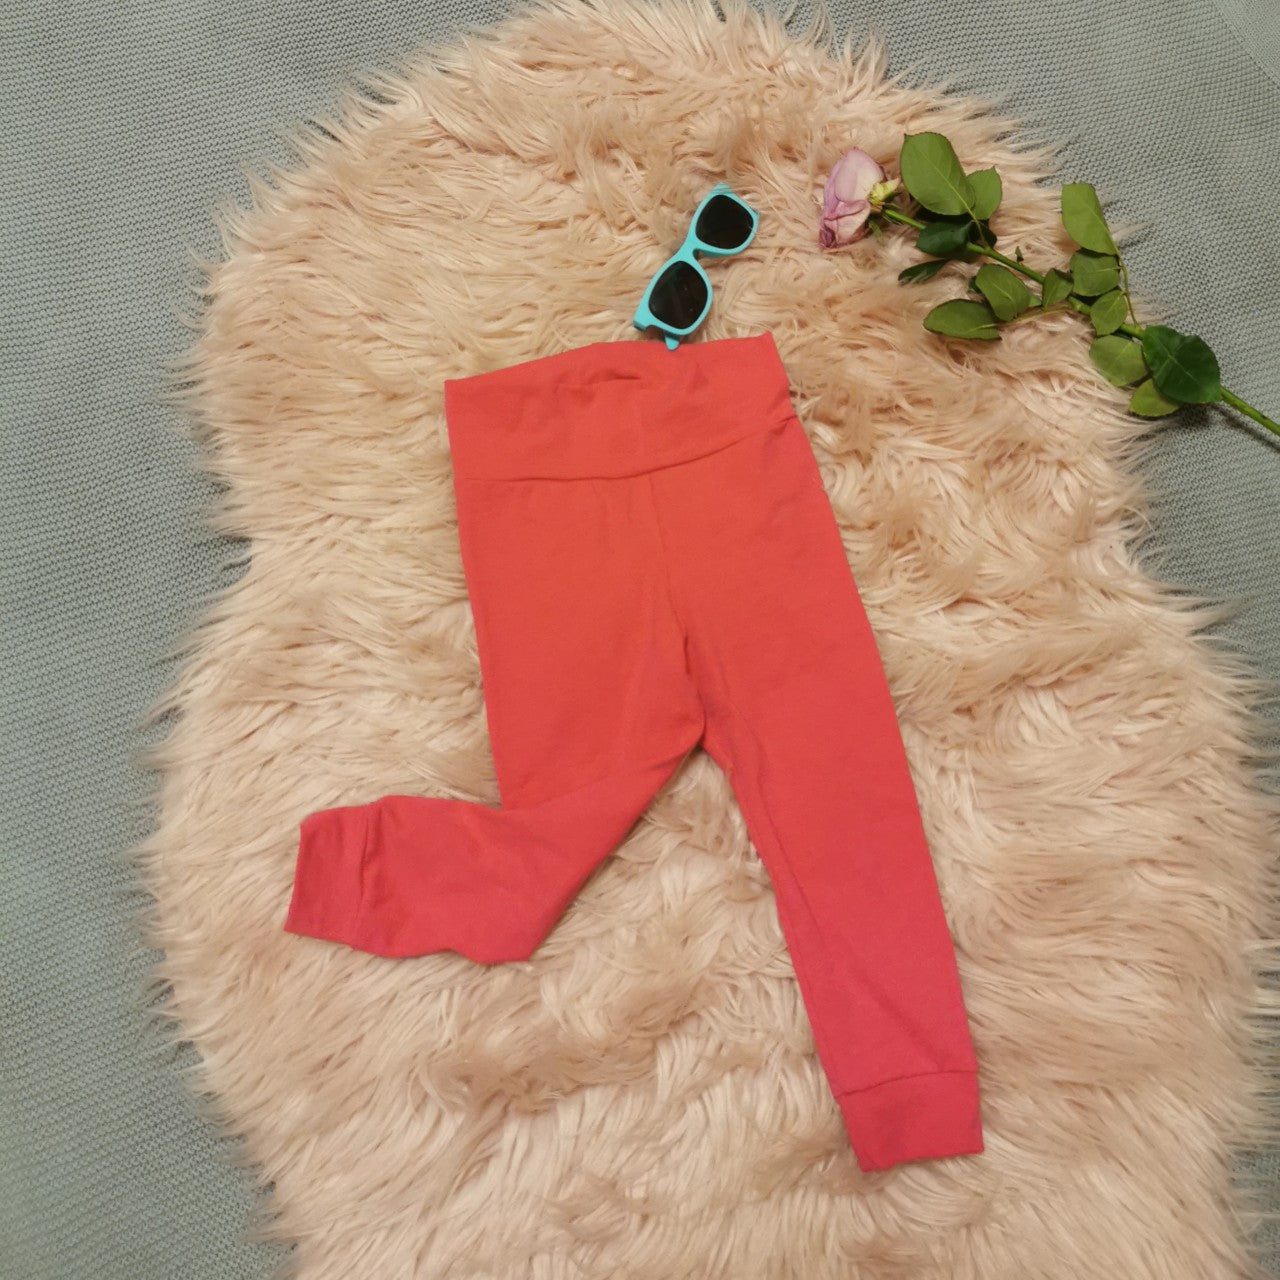 Soft and stretchy leggings with a comfortable non-elasticated waist. Handmade using fuchsia organic cotton jersey.